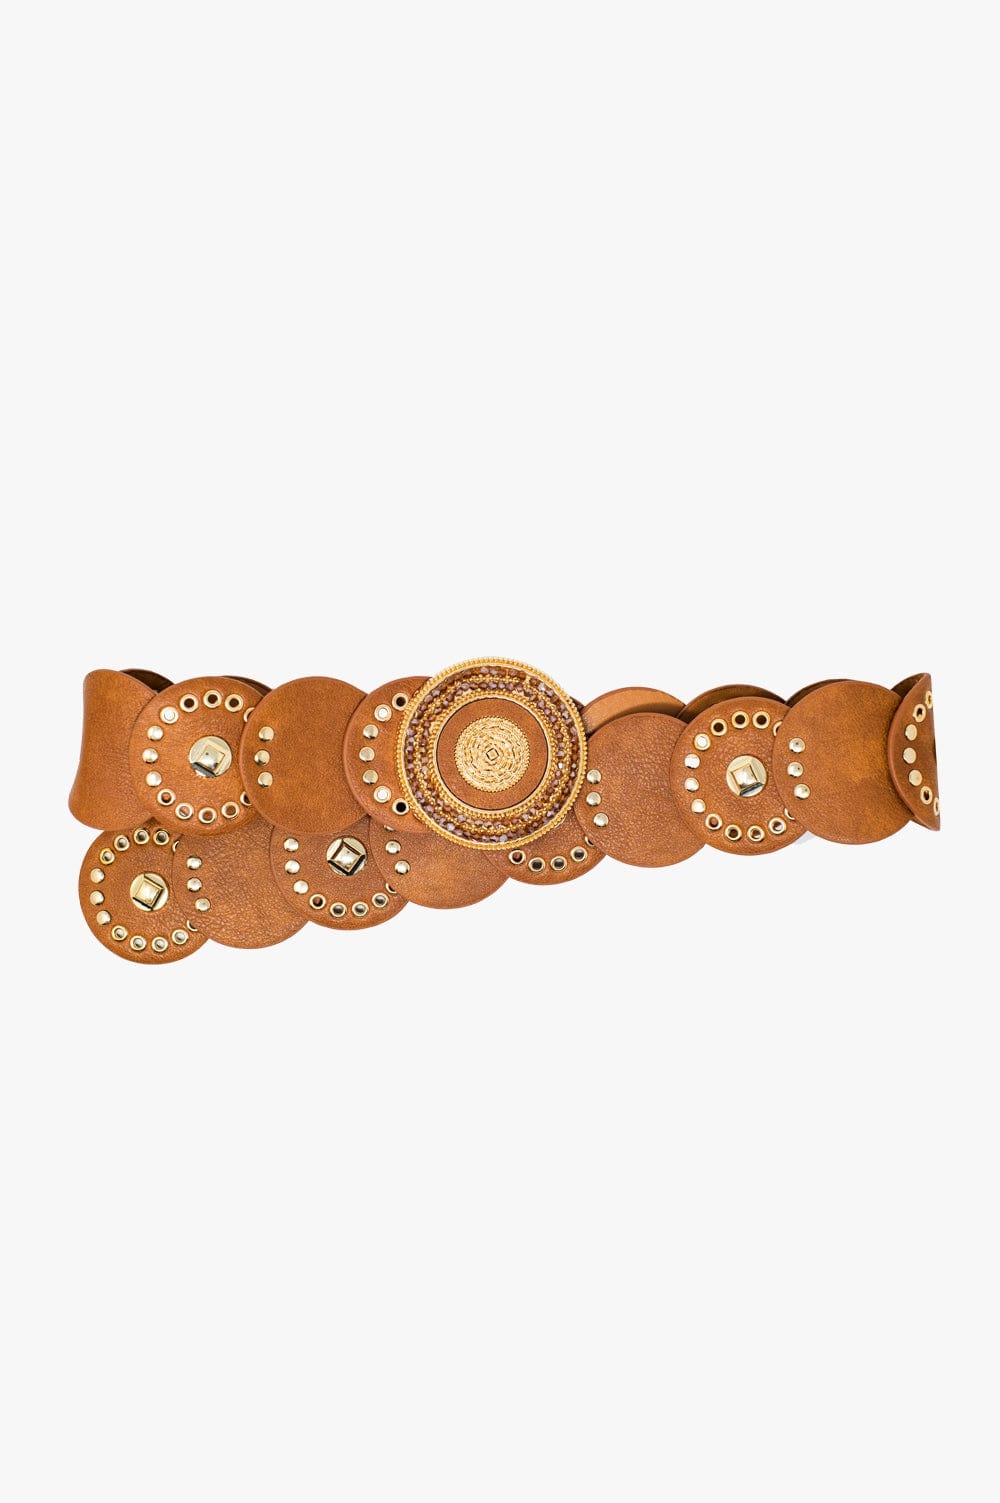 Q2 Women's Belt Brown Leather Belt With Gold Rhinestone Round Buckle And Golden Details